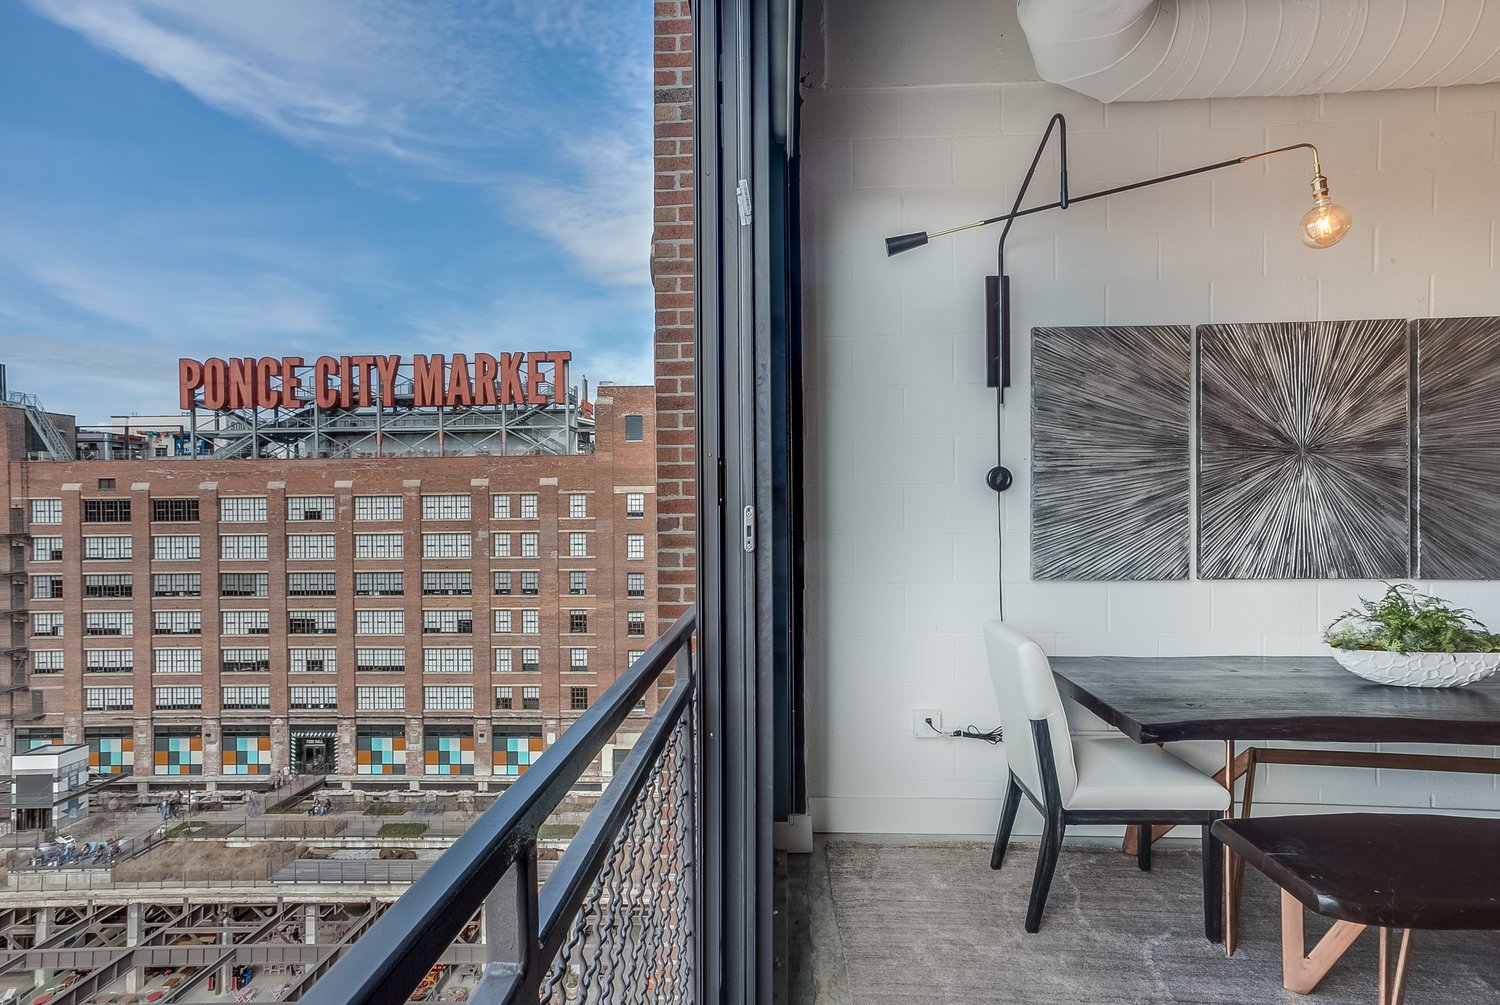 View of the Ponce City Market from our Luxury Vacation Rental in Atlanta, GA.